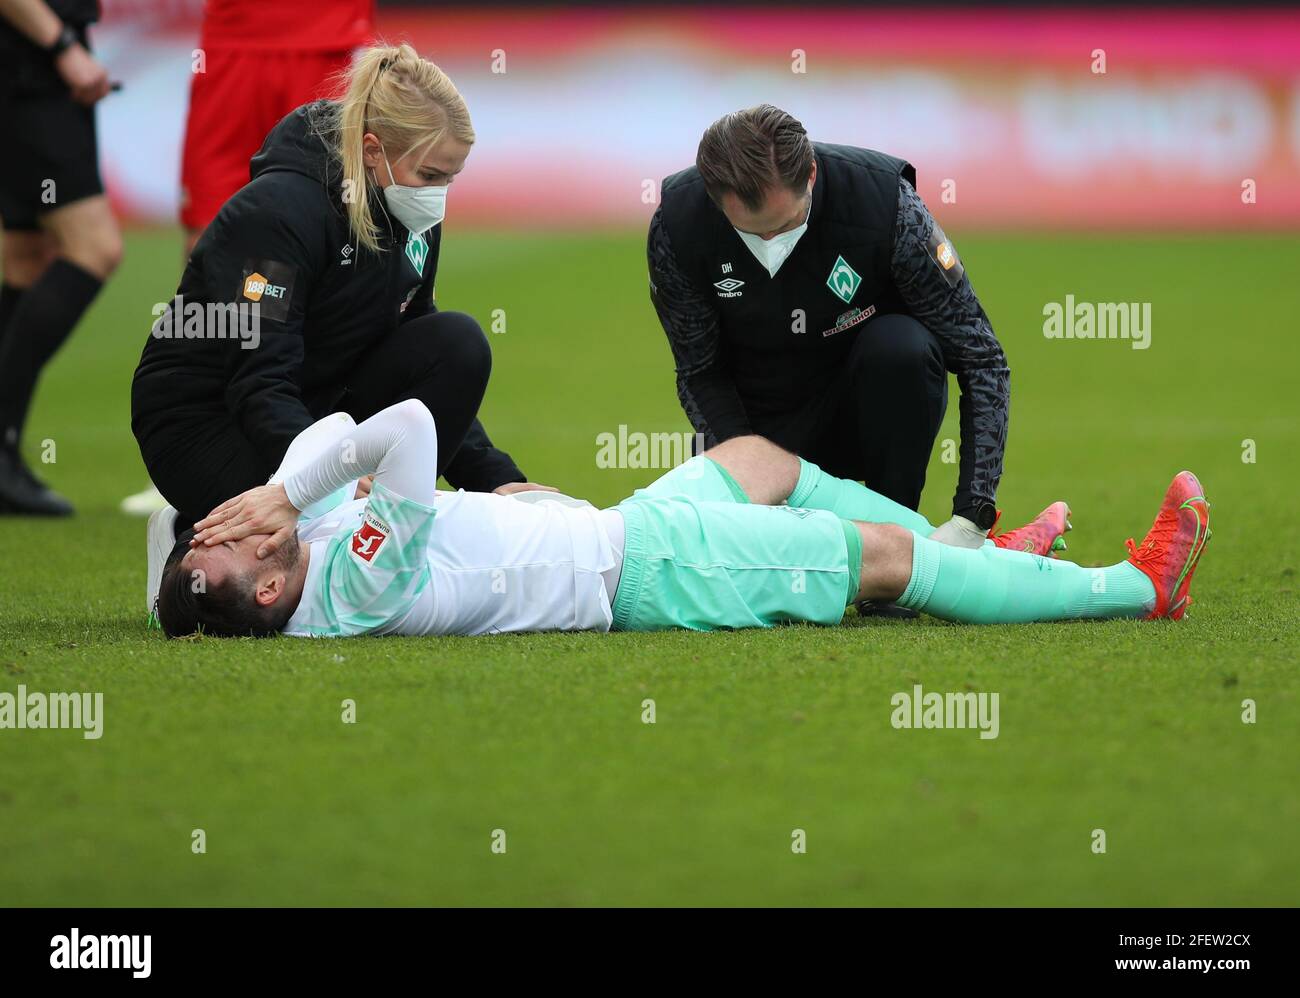 Berlin, Germany. 24th Apr, 2021. Football: Bundesliga, 1. FC Union Berlin - Werder Bremen, Matchday 31 at Stadion An der Alten Försterei. Bremen's Kevin Möhwald is injured on the pitch and requires treatment. IMPORTANT NOTE: In accordance with the regulations of the DFL Deutsche Fußball Liga and the DFB Deutscher Fußball-Bund, it is prohibited to use or have used photographs taken in the stadium and/or of the match in the form of sequence pictures and/or video-like photo series. Credit: Andreas Gora/dpa-Pool/dpa/Alamy Live News Stock Photo